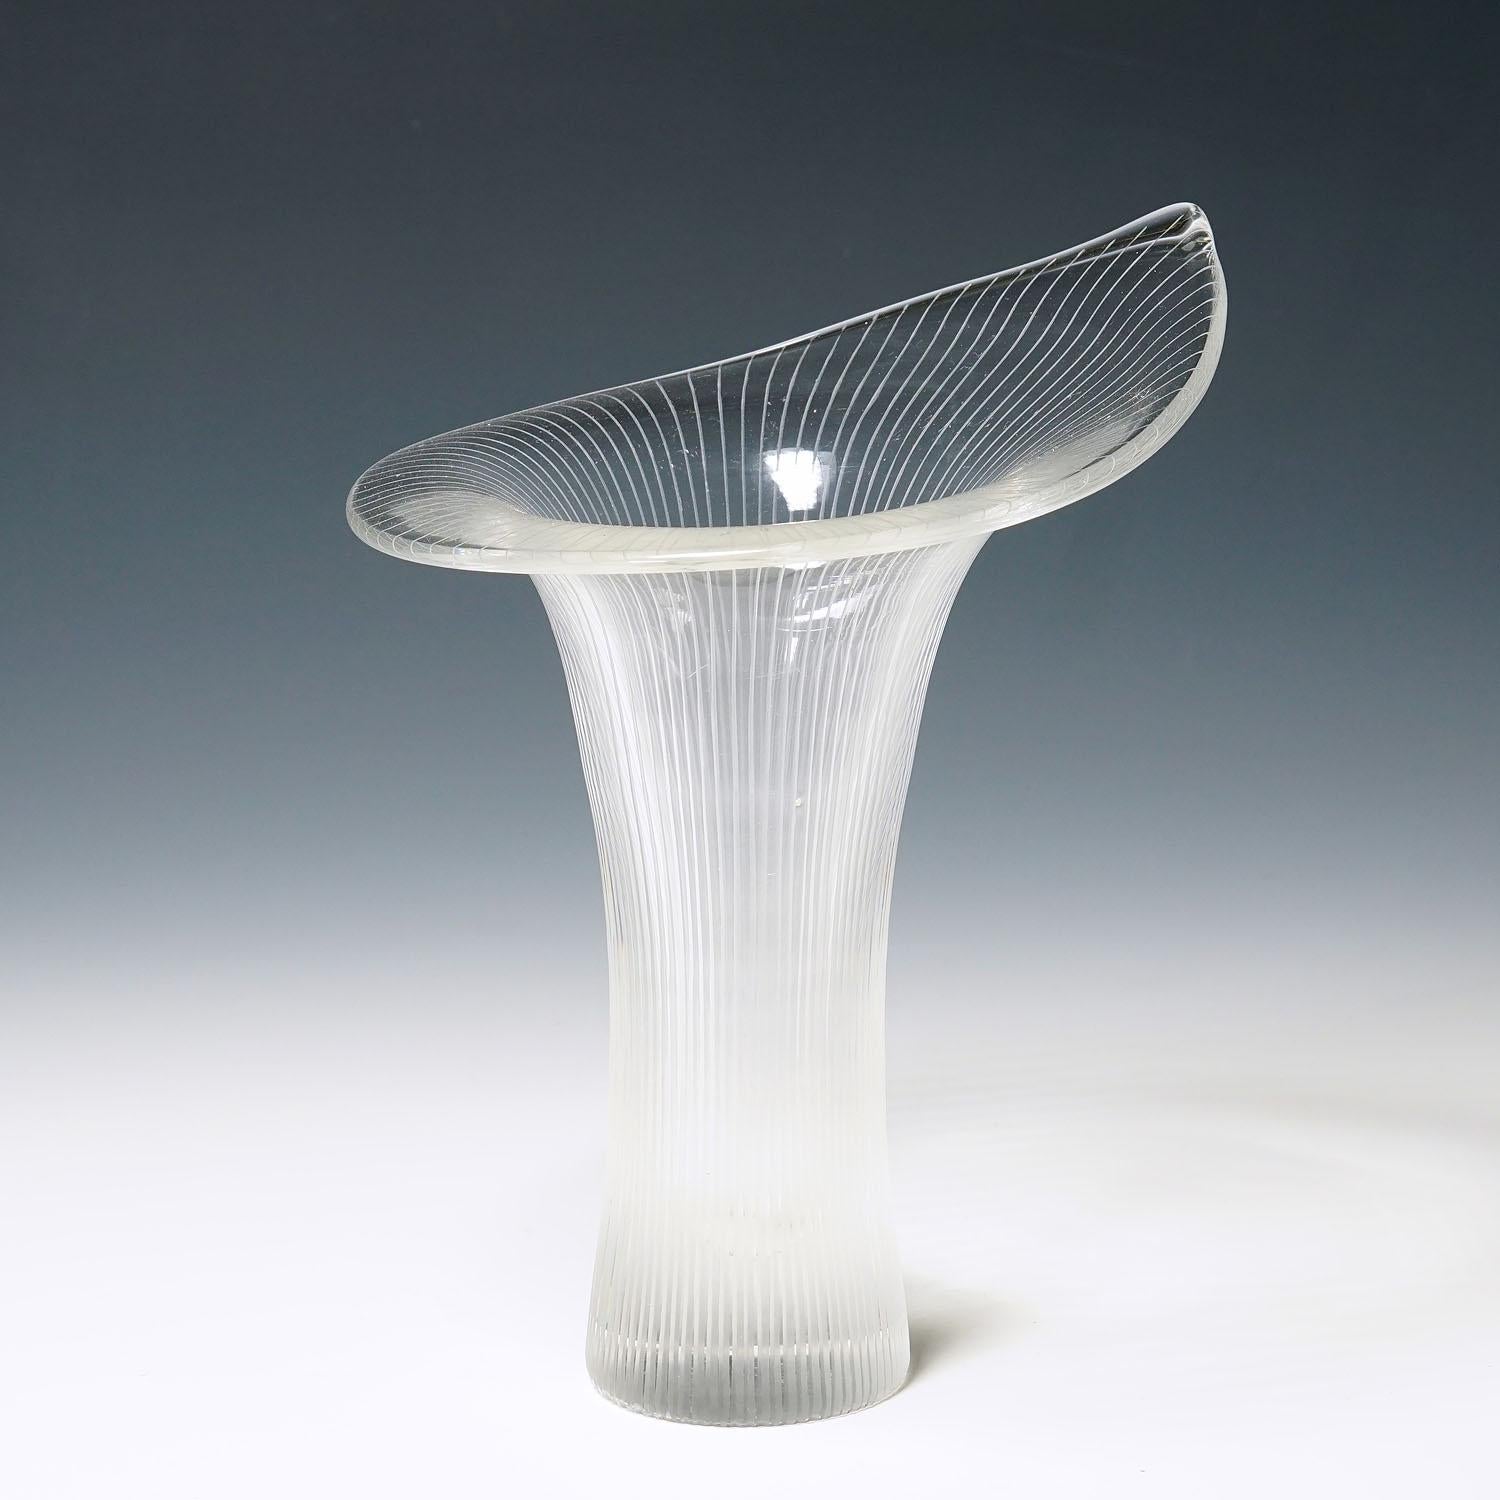 Kantarelli Art glass vase by Tapio Wirkkala for Iittala, 1951

A large vintage 'Kantarelli' (chantertelle) vase designed by Tapio Wirkkala for Iittala Glassworks in 1951. Mold blown crystal clear glass with line cuttings. Marked with incised